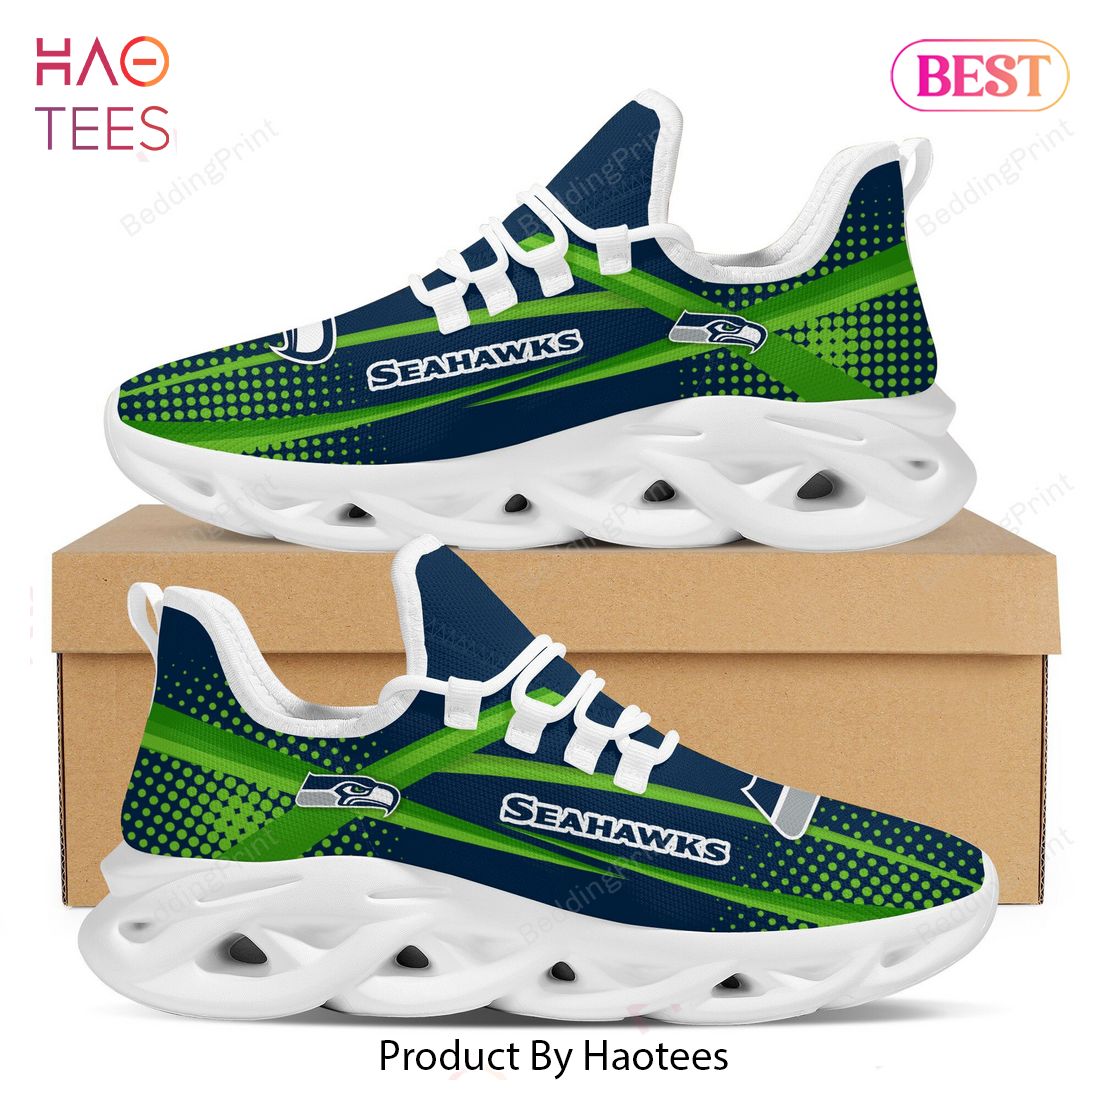 Seattle Seahawks NFL Football Team Blue Mix Green Max Soul Shoes